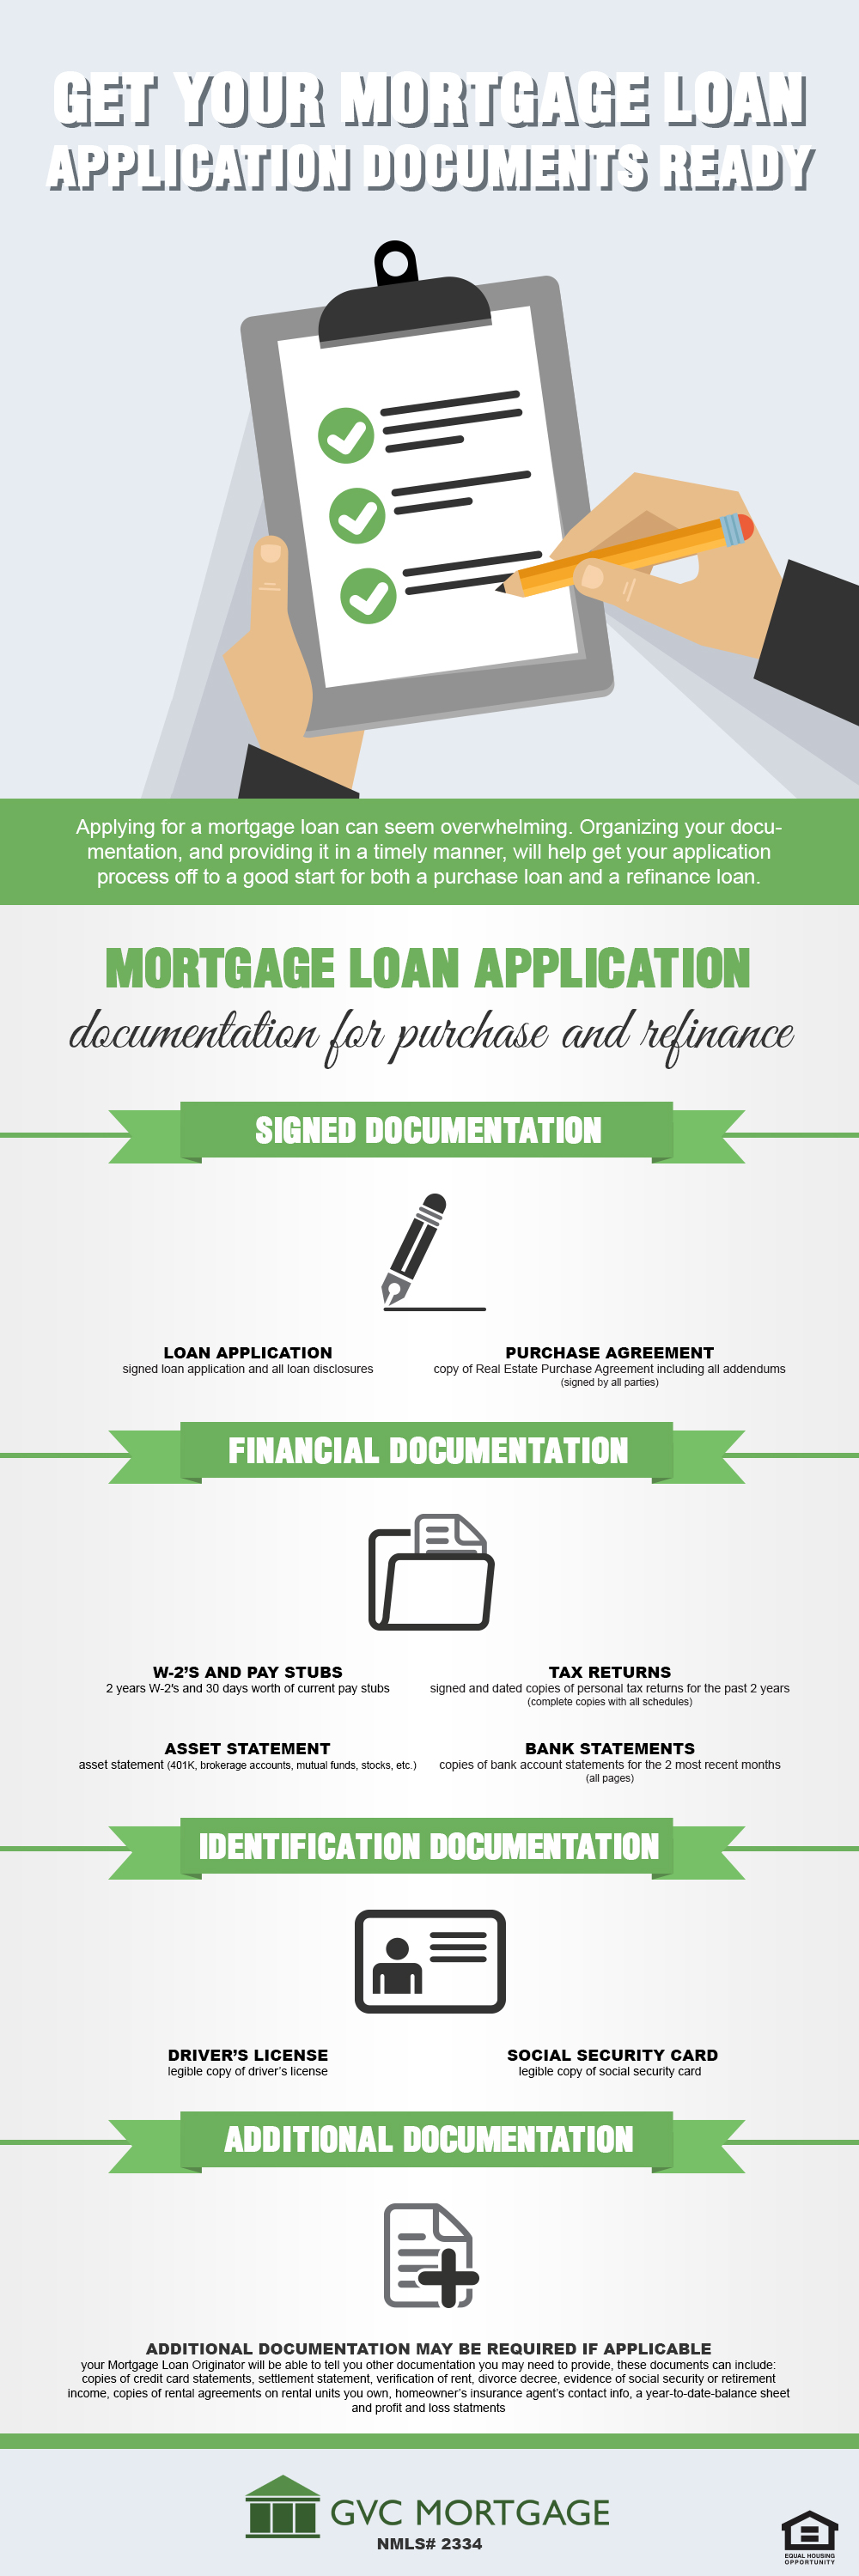 Documents Needed for a Mortgage Loan: Your Complete Checklist